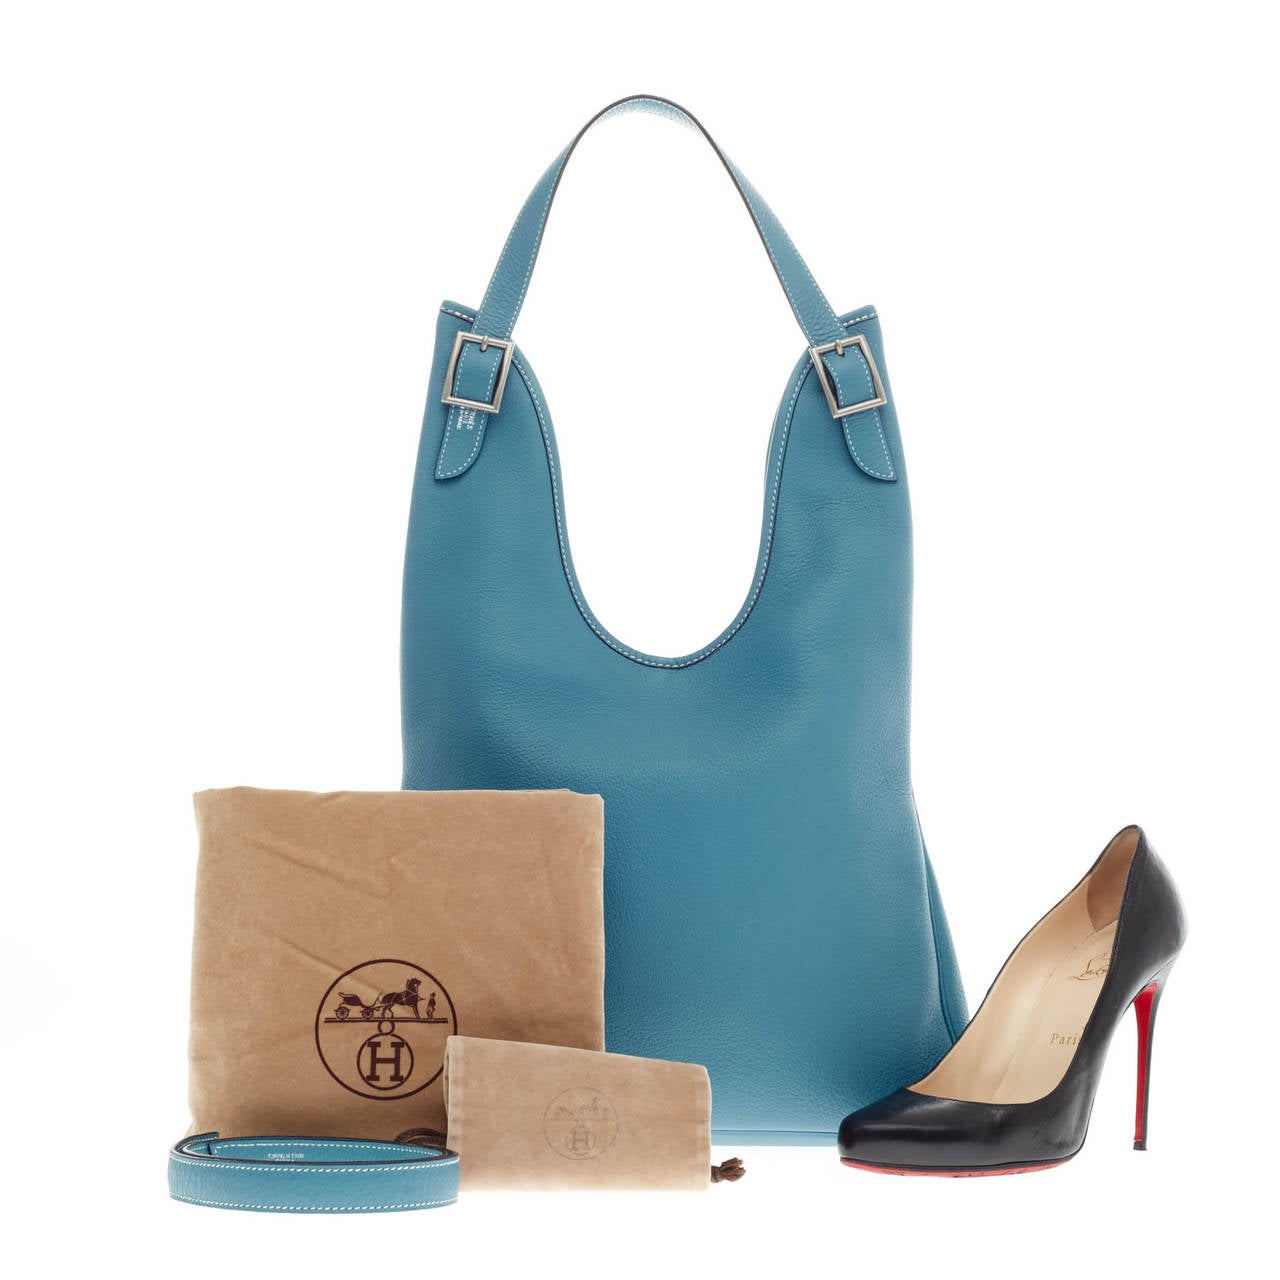 This authentic Hermes Massai Clemence PM combines a simple and functional style only from Hermes perfect for everyday excursions. Crafted from soft luxurious blue jean taurillion clemence leather, this stylish shoulder bag features all-around white